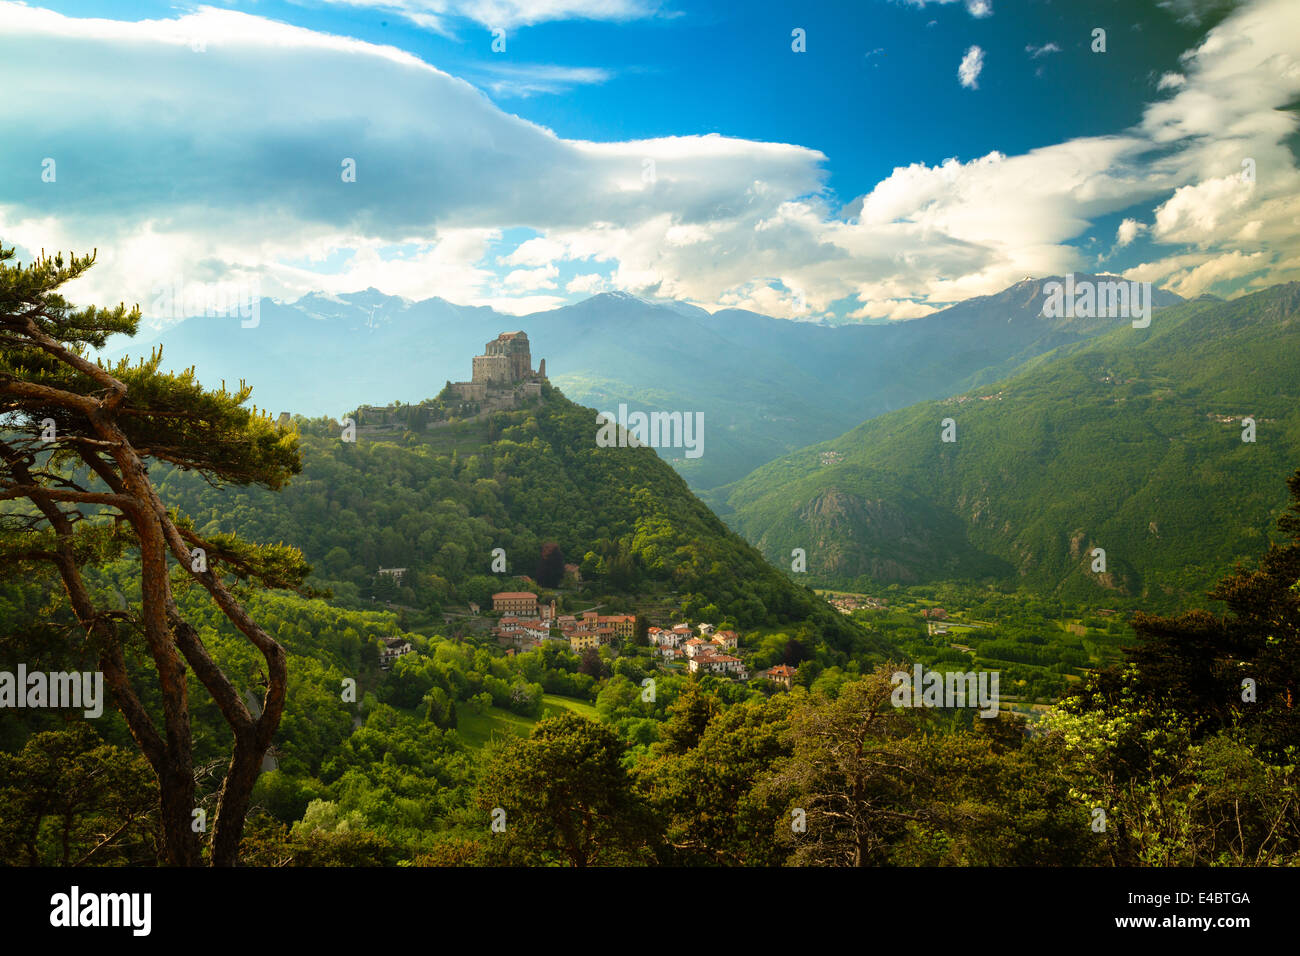 View of the monastery church of Sacra di San Michele in the Susa Valley, Italy. The Alps rise up in the background. Stock Photo